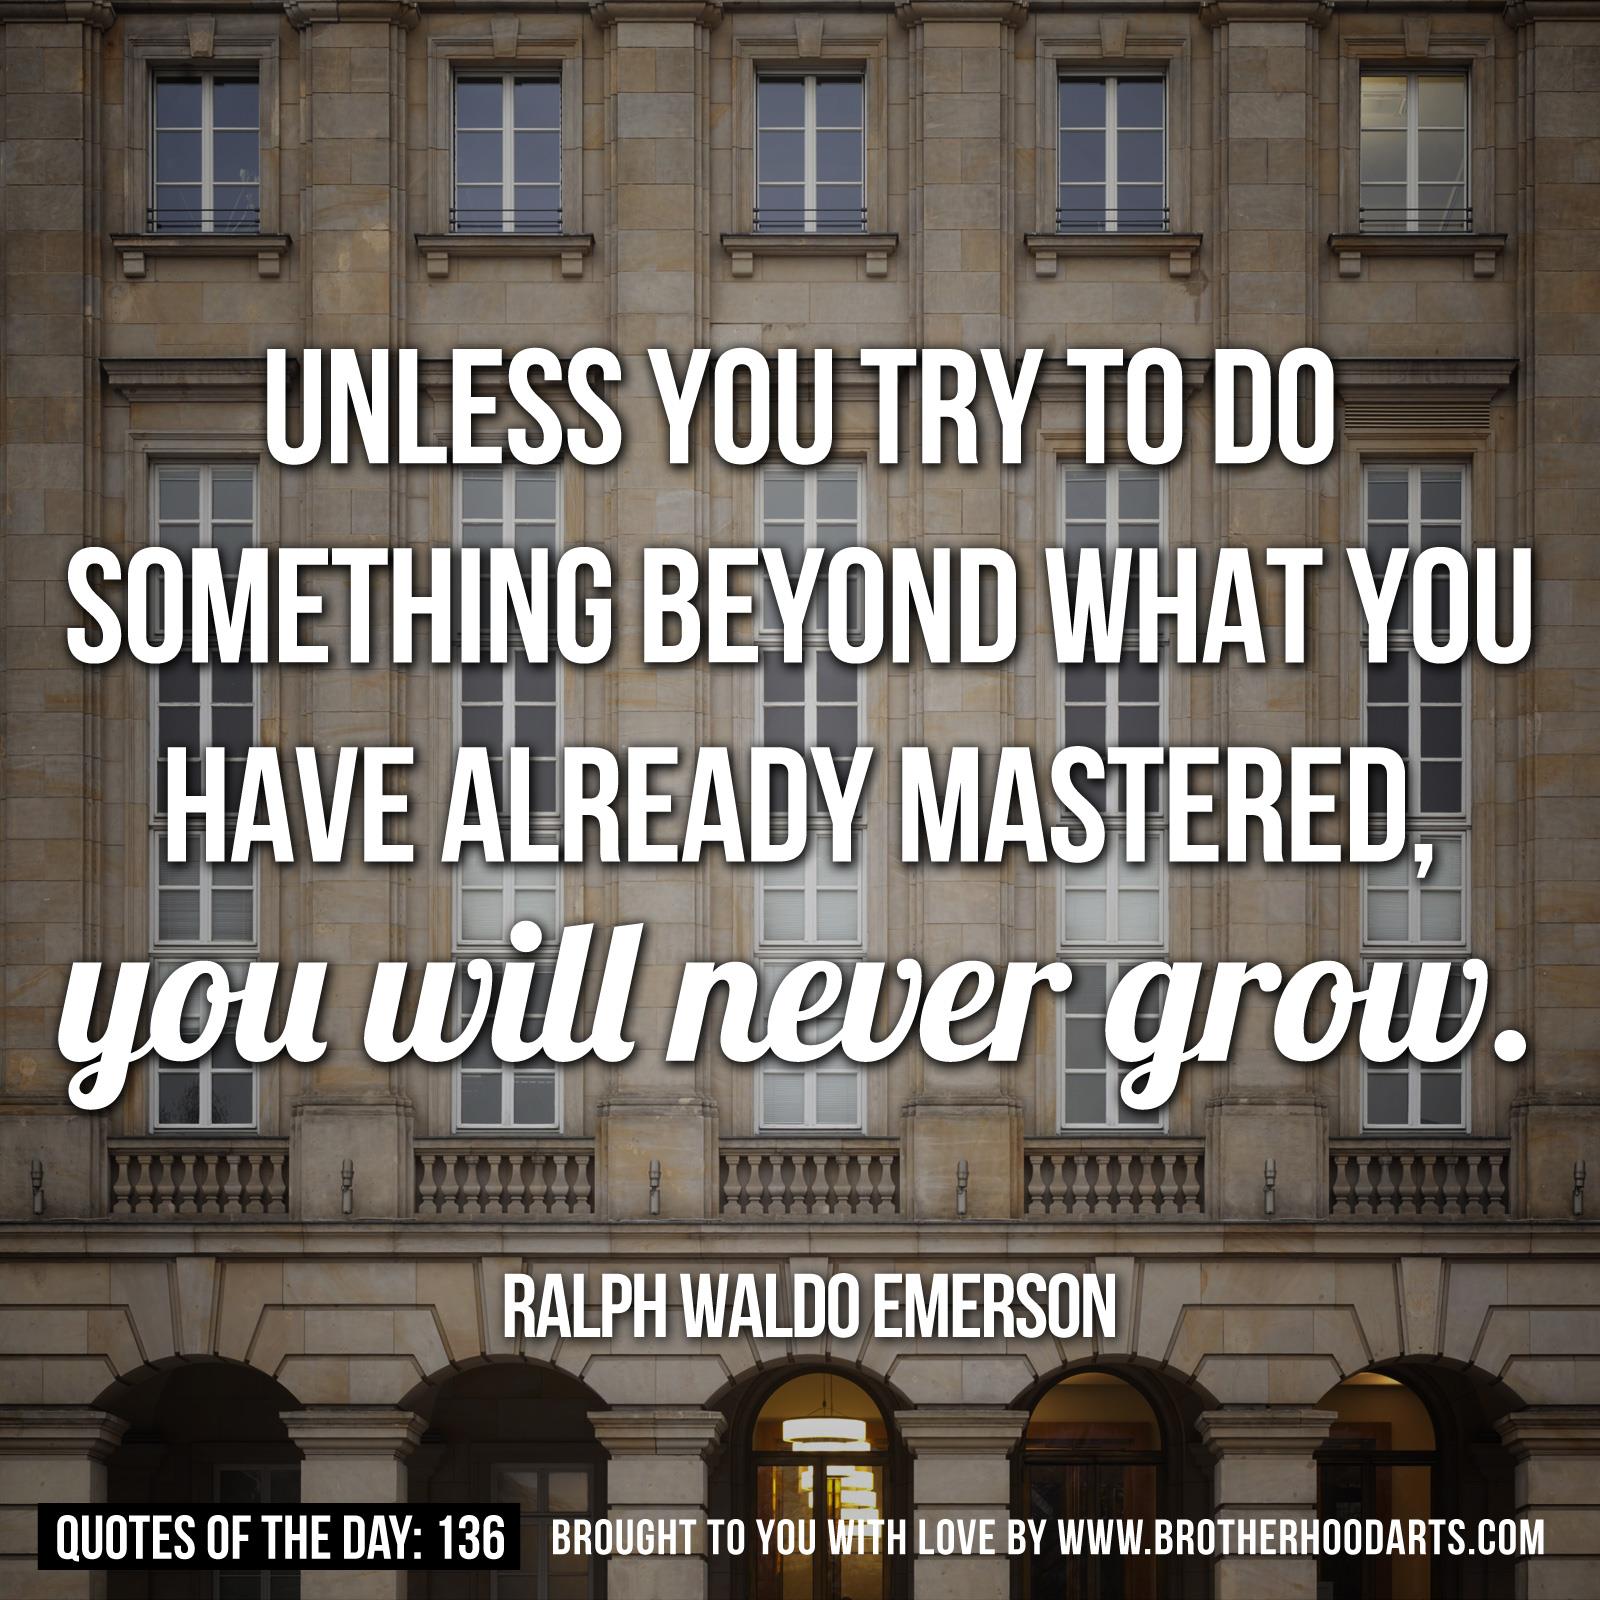 Unless you try to do something beyond what you have already mastered, you will never grow. Ralph Waldo Emerson